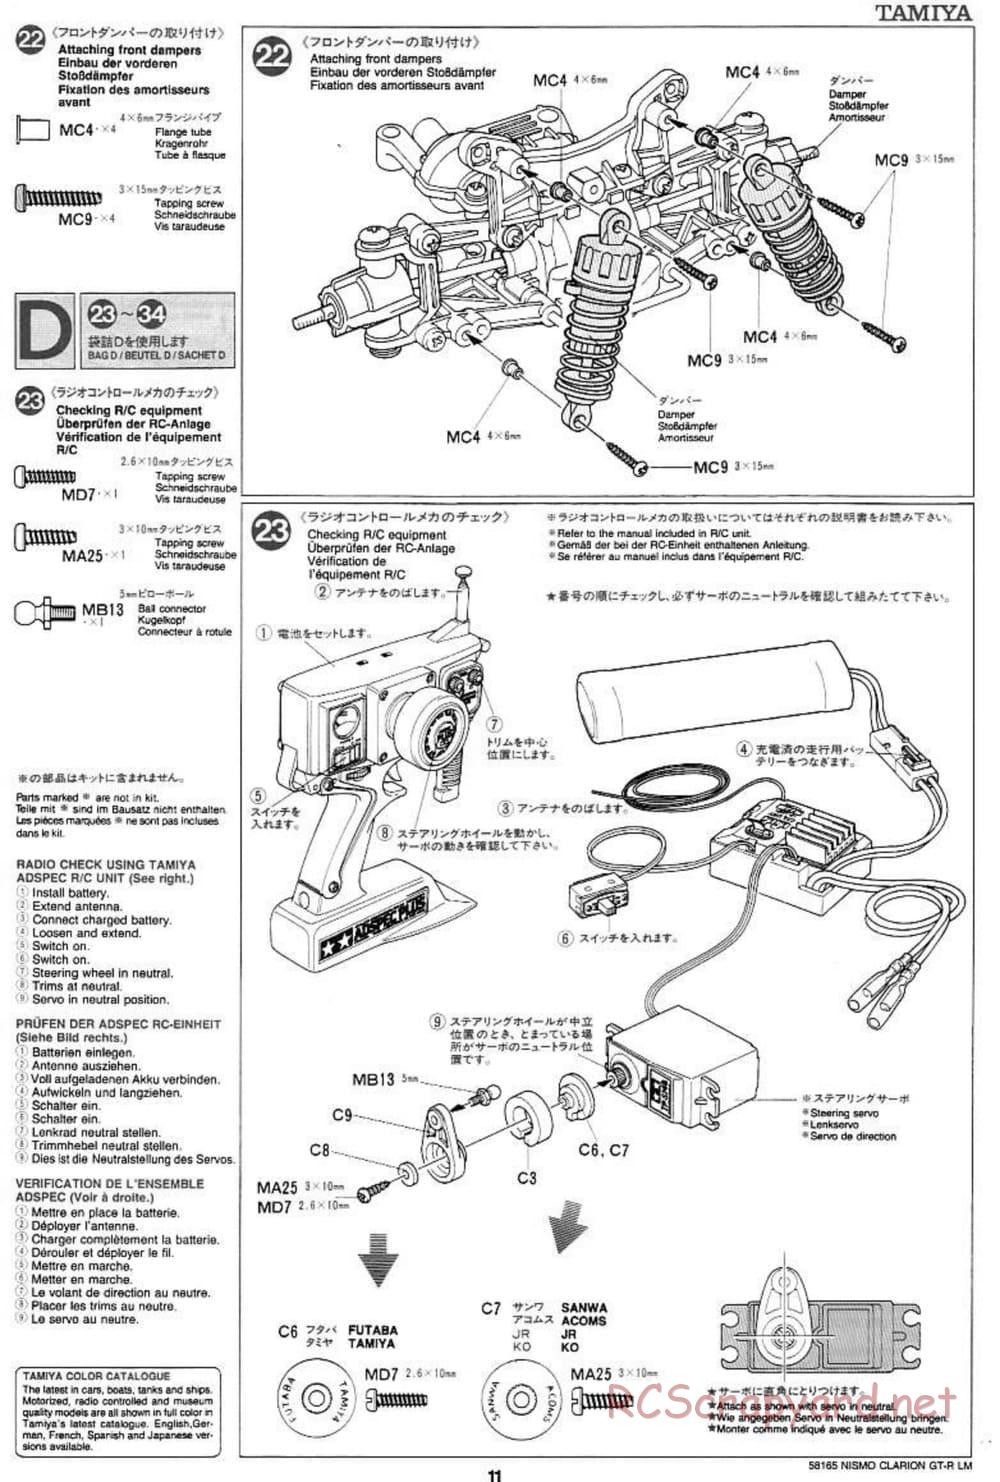 Tamiya - Nismo Clarion GT-R LM - TA-02W Chassis - Manual - Page 11